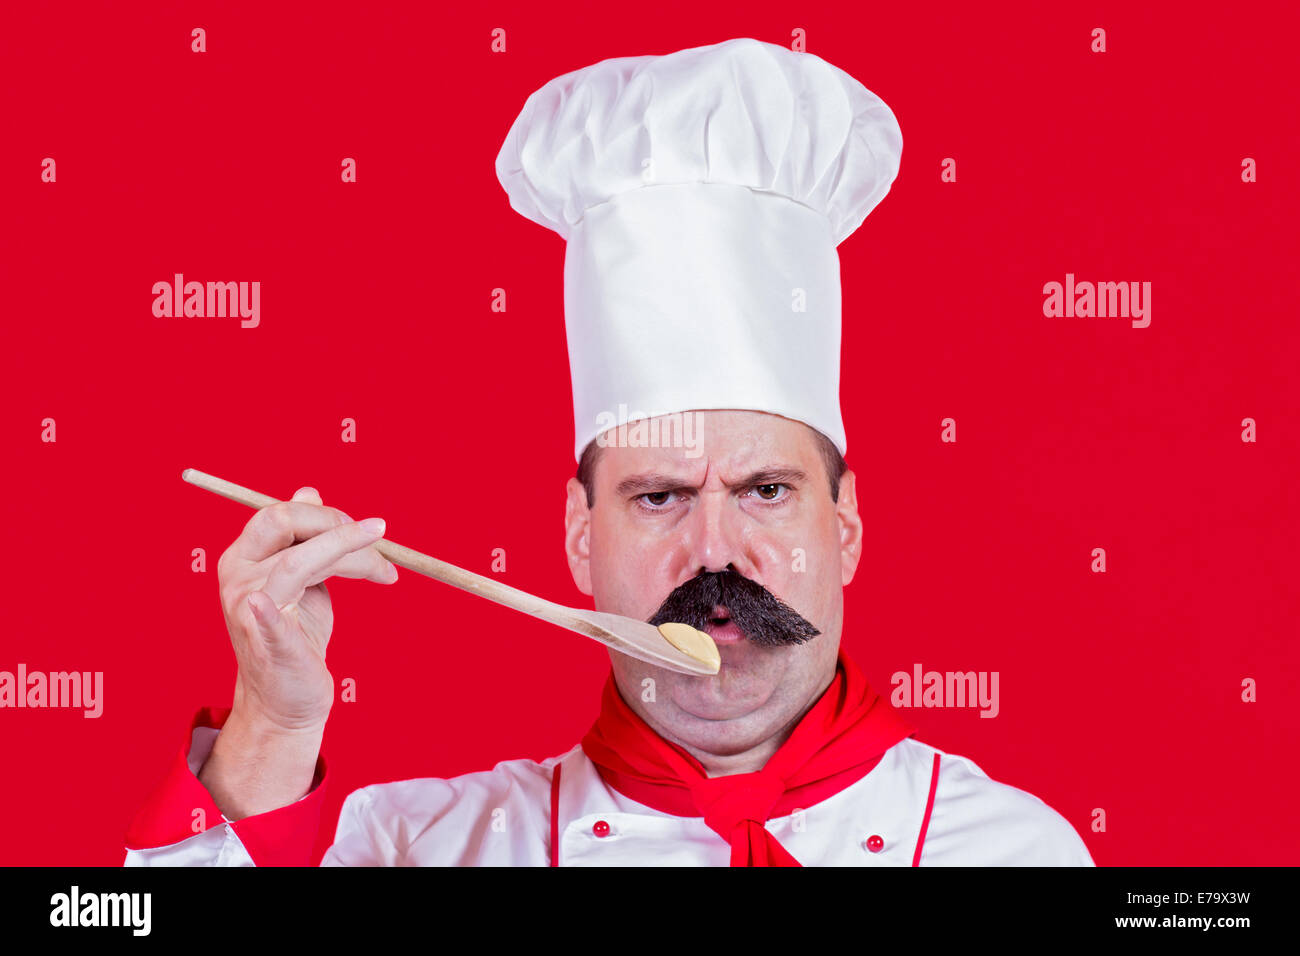 https://c8.alamy.com/comp/E79X3W/chef-tasting-the-food-from-wooden-spoons-E79X3W.jpg